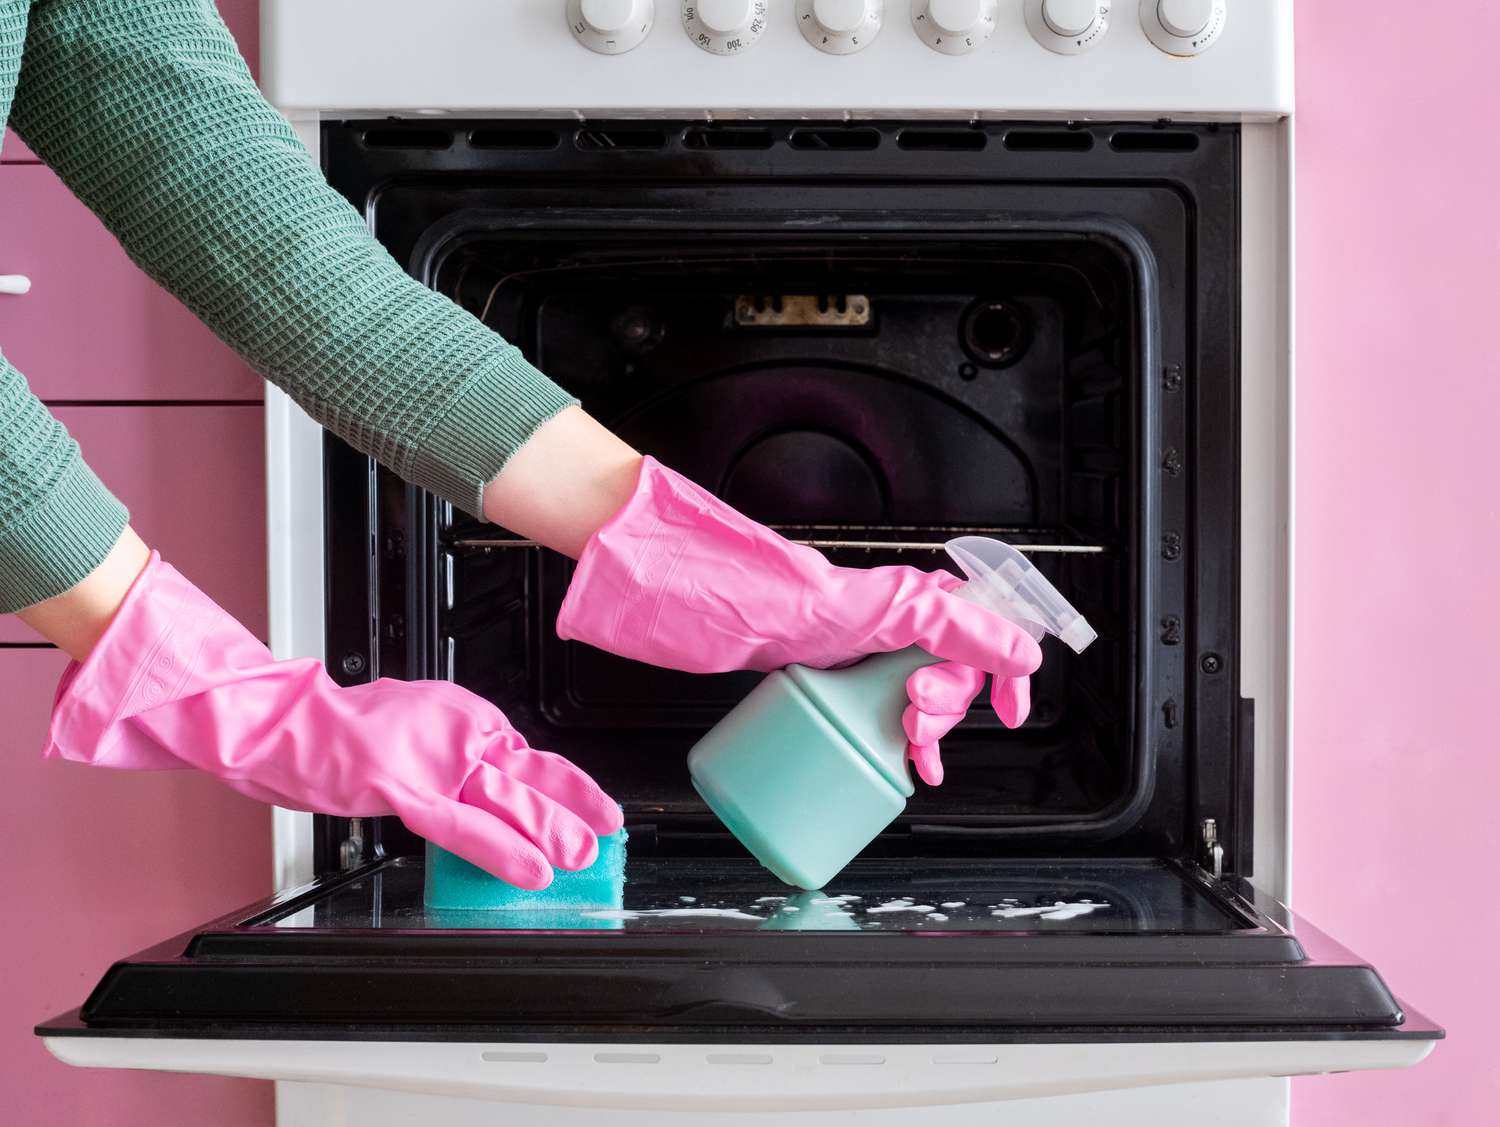 What is the Best Way to Clean an Oven?